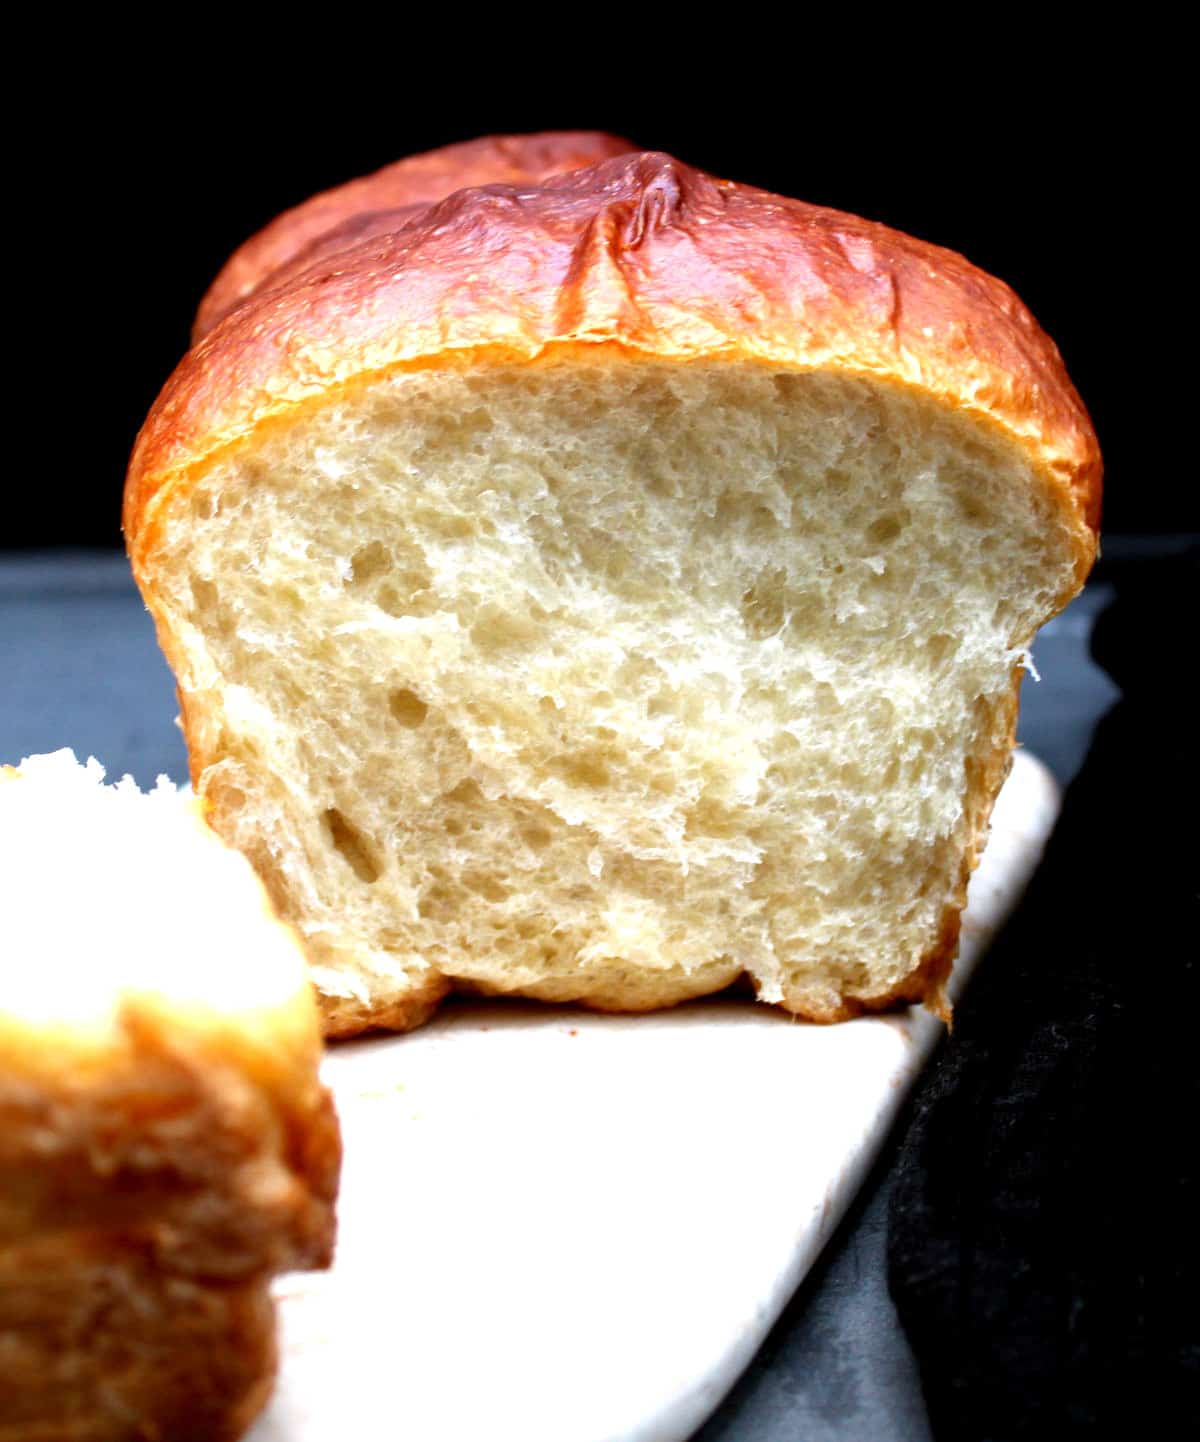 Vegan olive oil brioche with feathery, soft, light crumb.